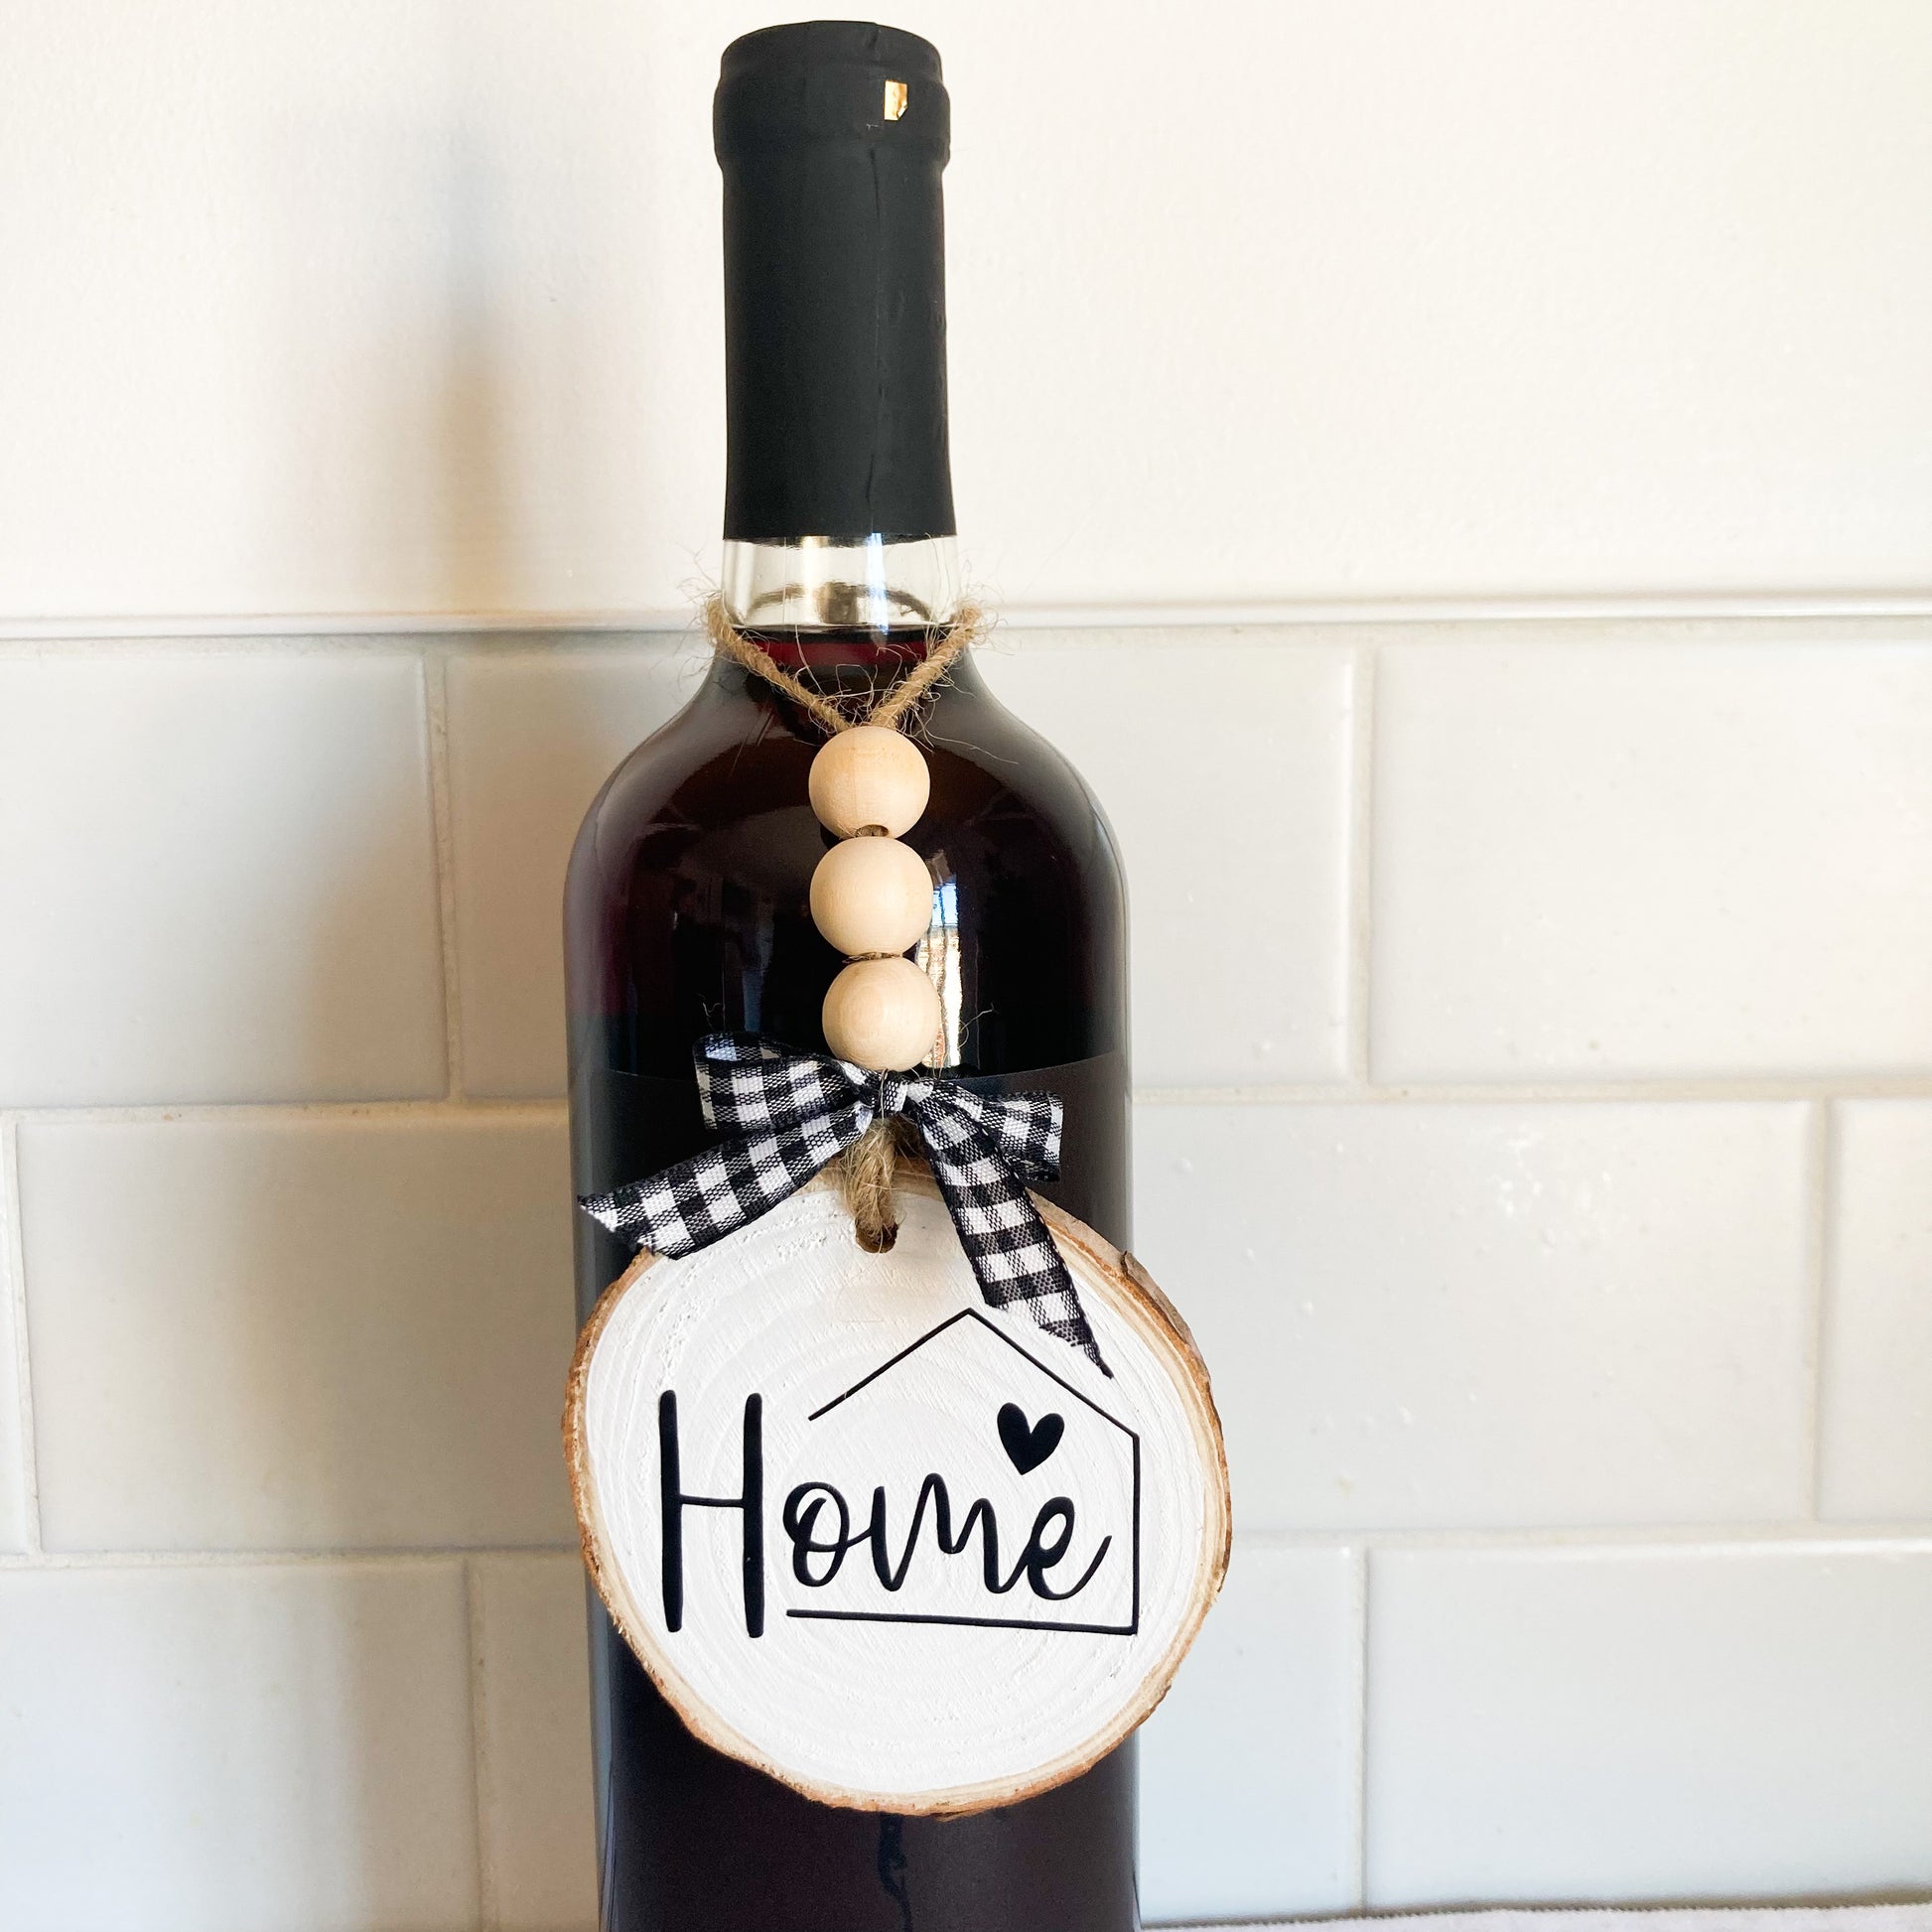 Handmade home ornament on 3 inch wood round painted white with black vinyl word Home jute twine hanger with wood beads and buffalo checkered bow displayed on a wine bottle